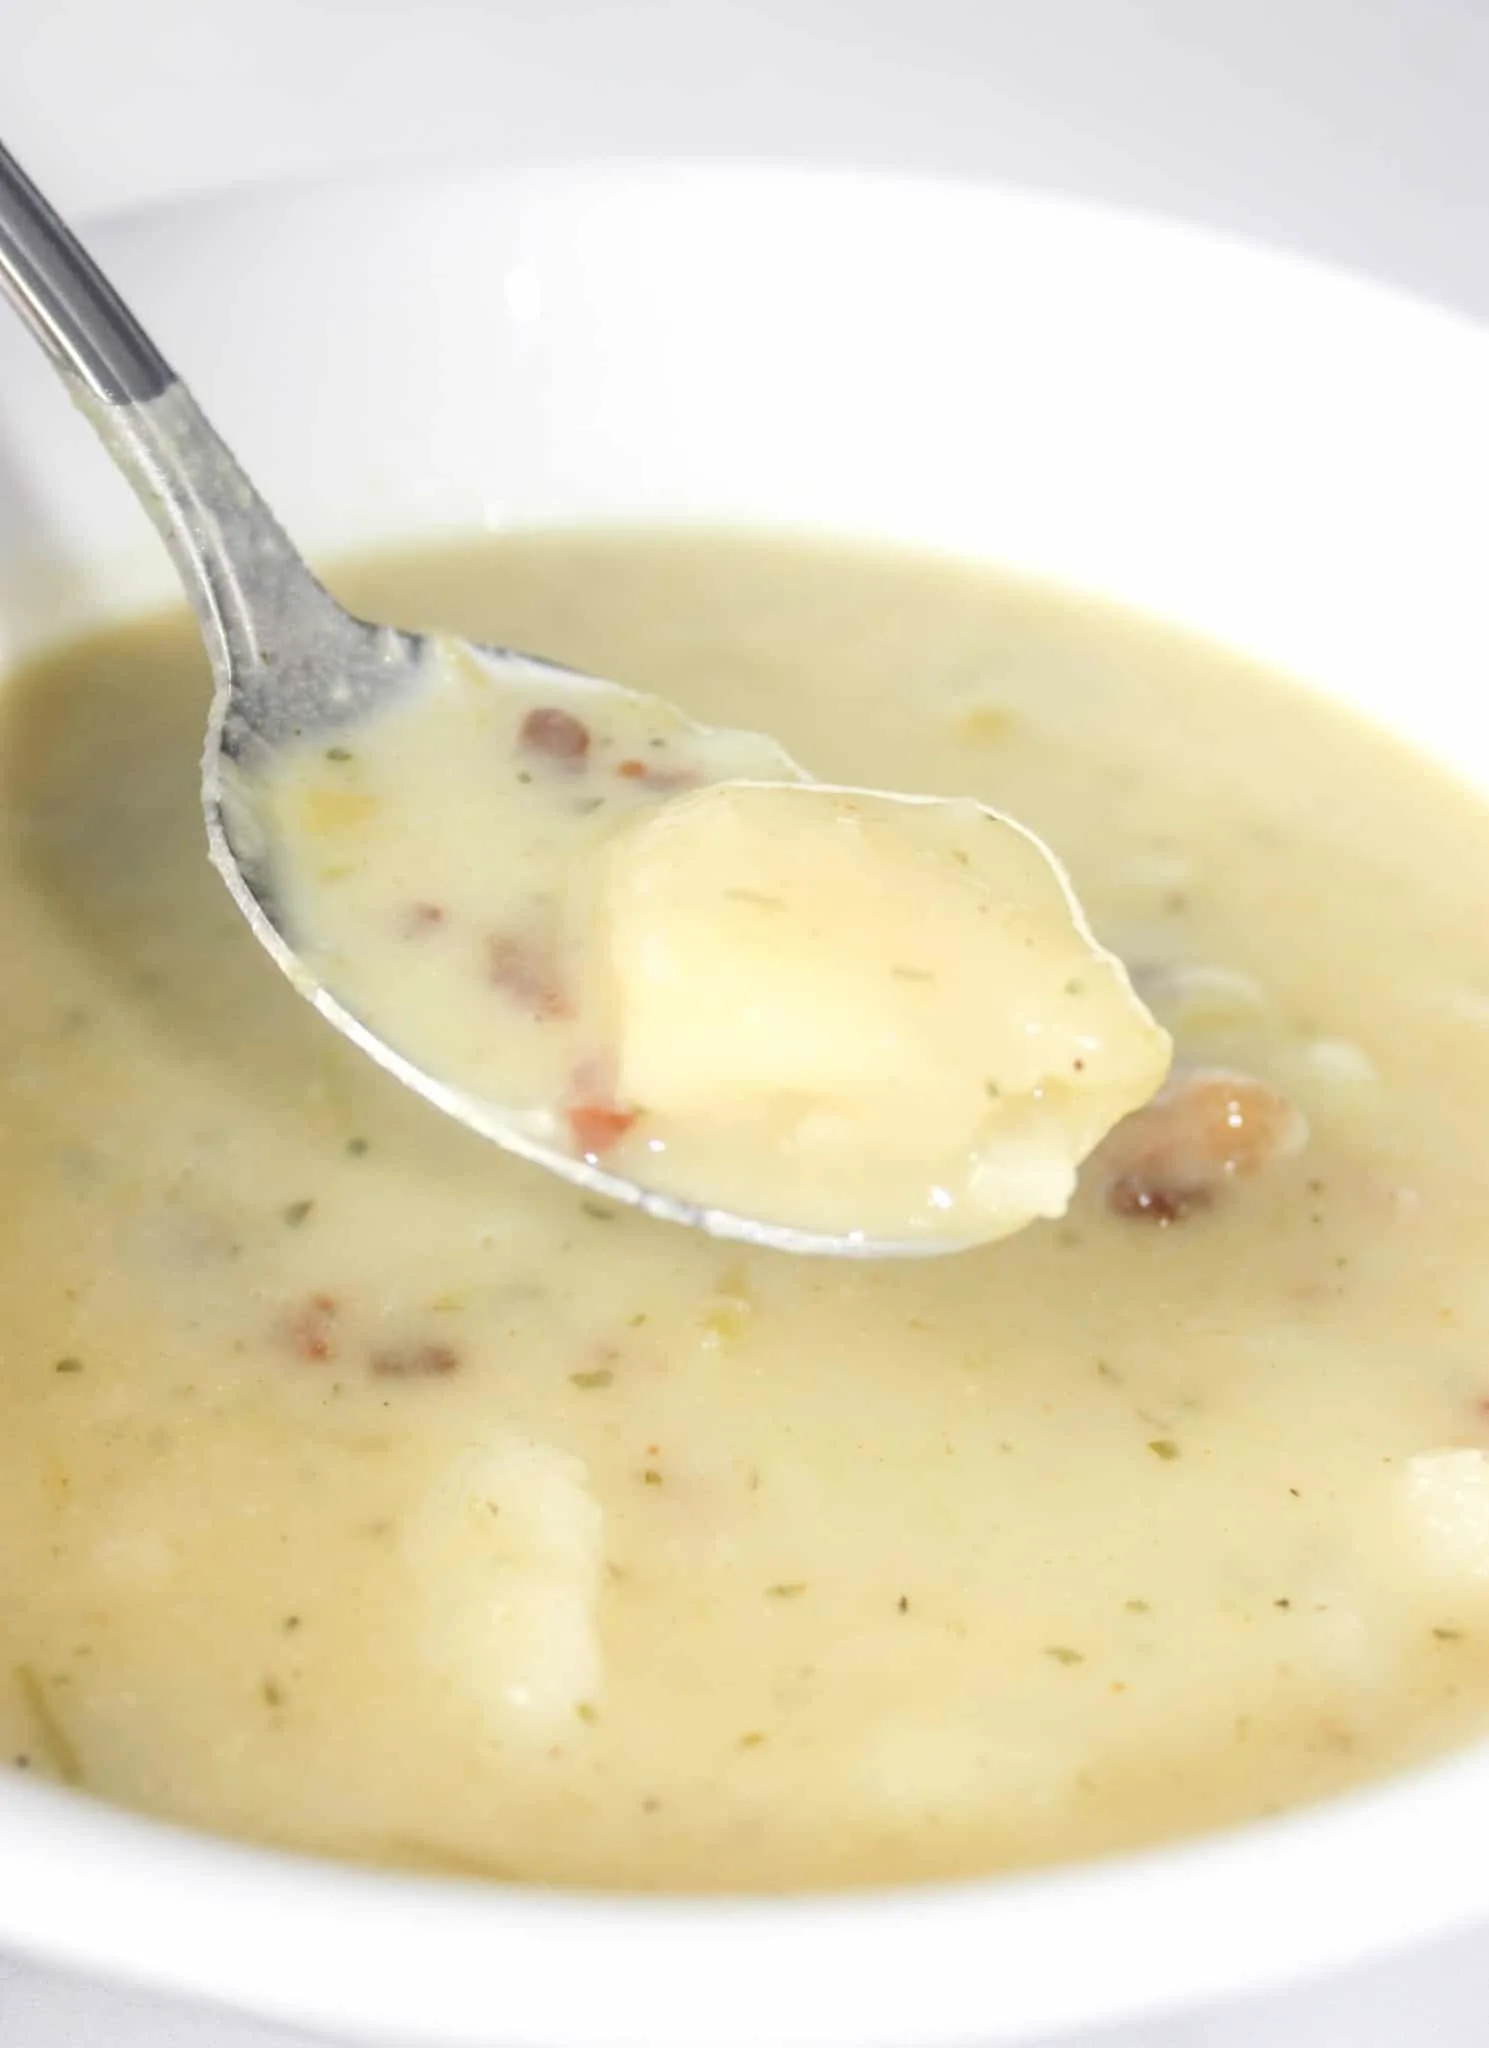 If you choose you can stir in some bacon bits to boost the flavour of this traditional soup.